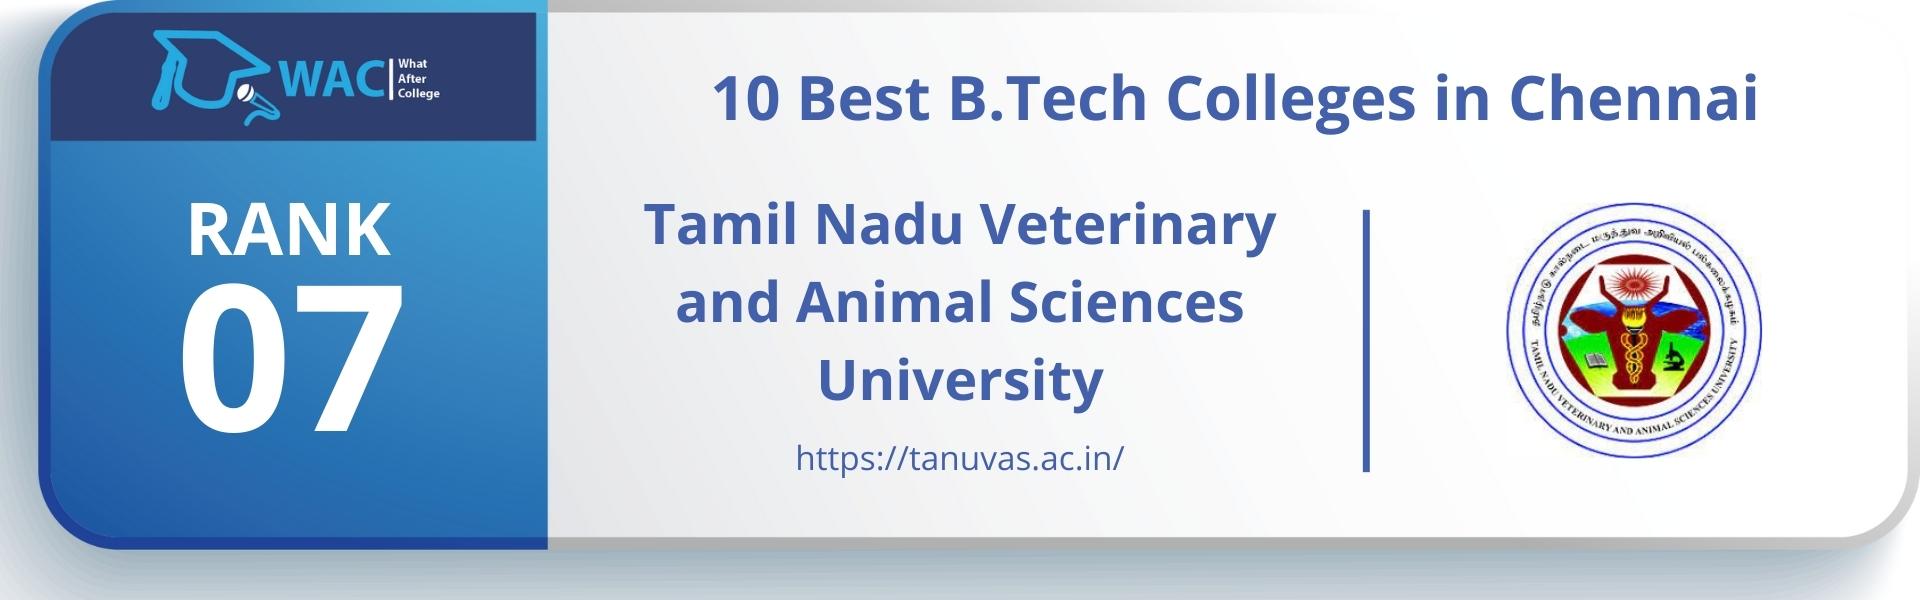 10-Best-BTech-Colleges-in-Chennai-Rank-7_-Tamil-Nadu-Veterinary-and-Animal-Sciences-University  | What After College